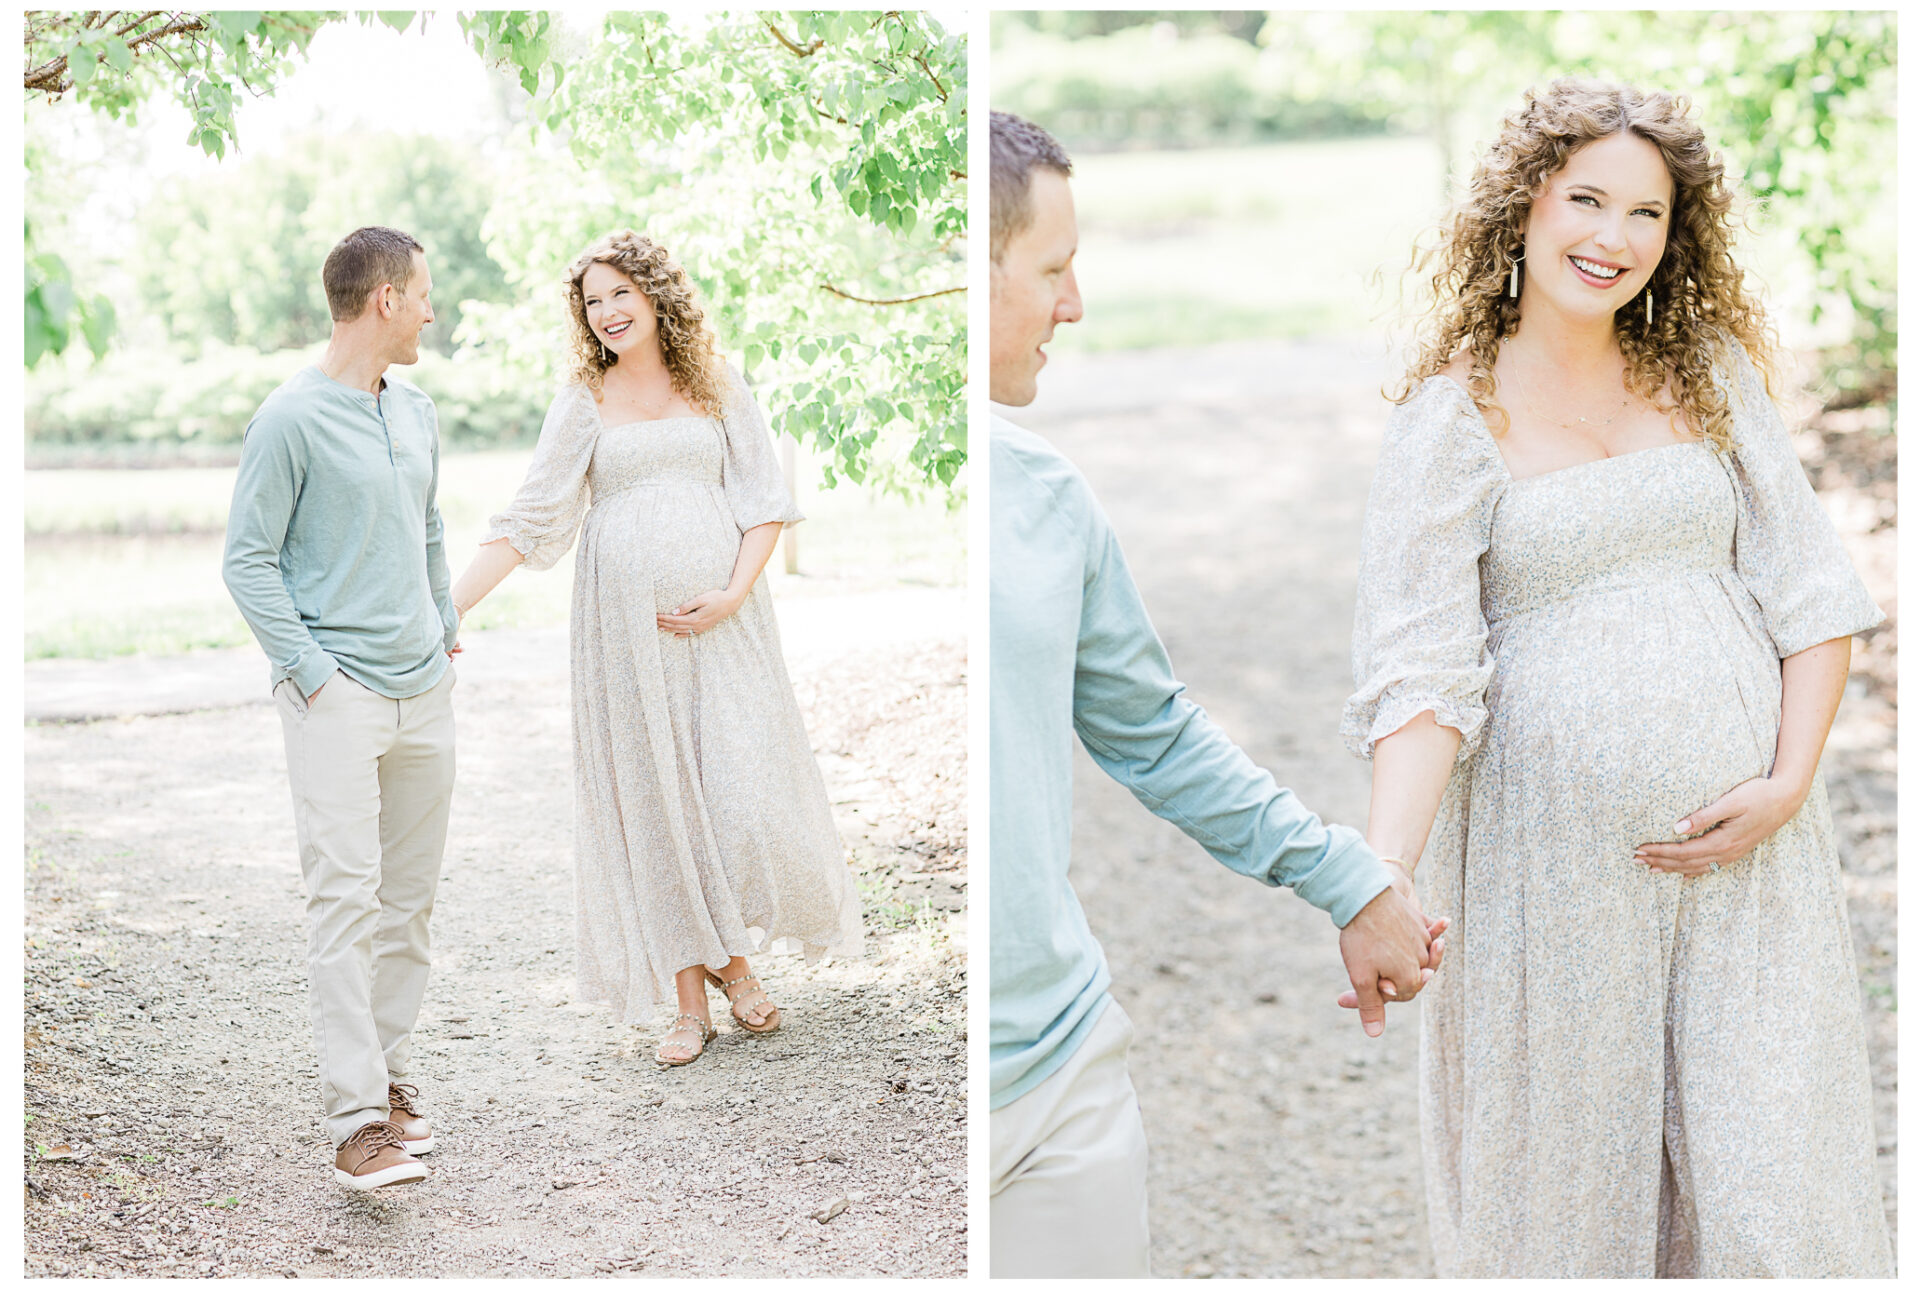 Winter Freire Photography | husband and wife standing on a path holding hands and smiling together during their outdoor maternity session